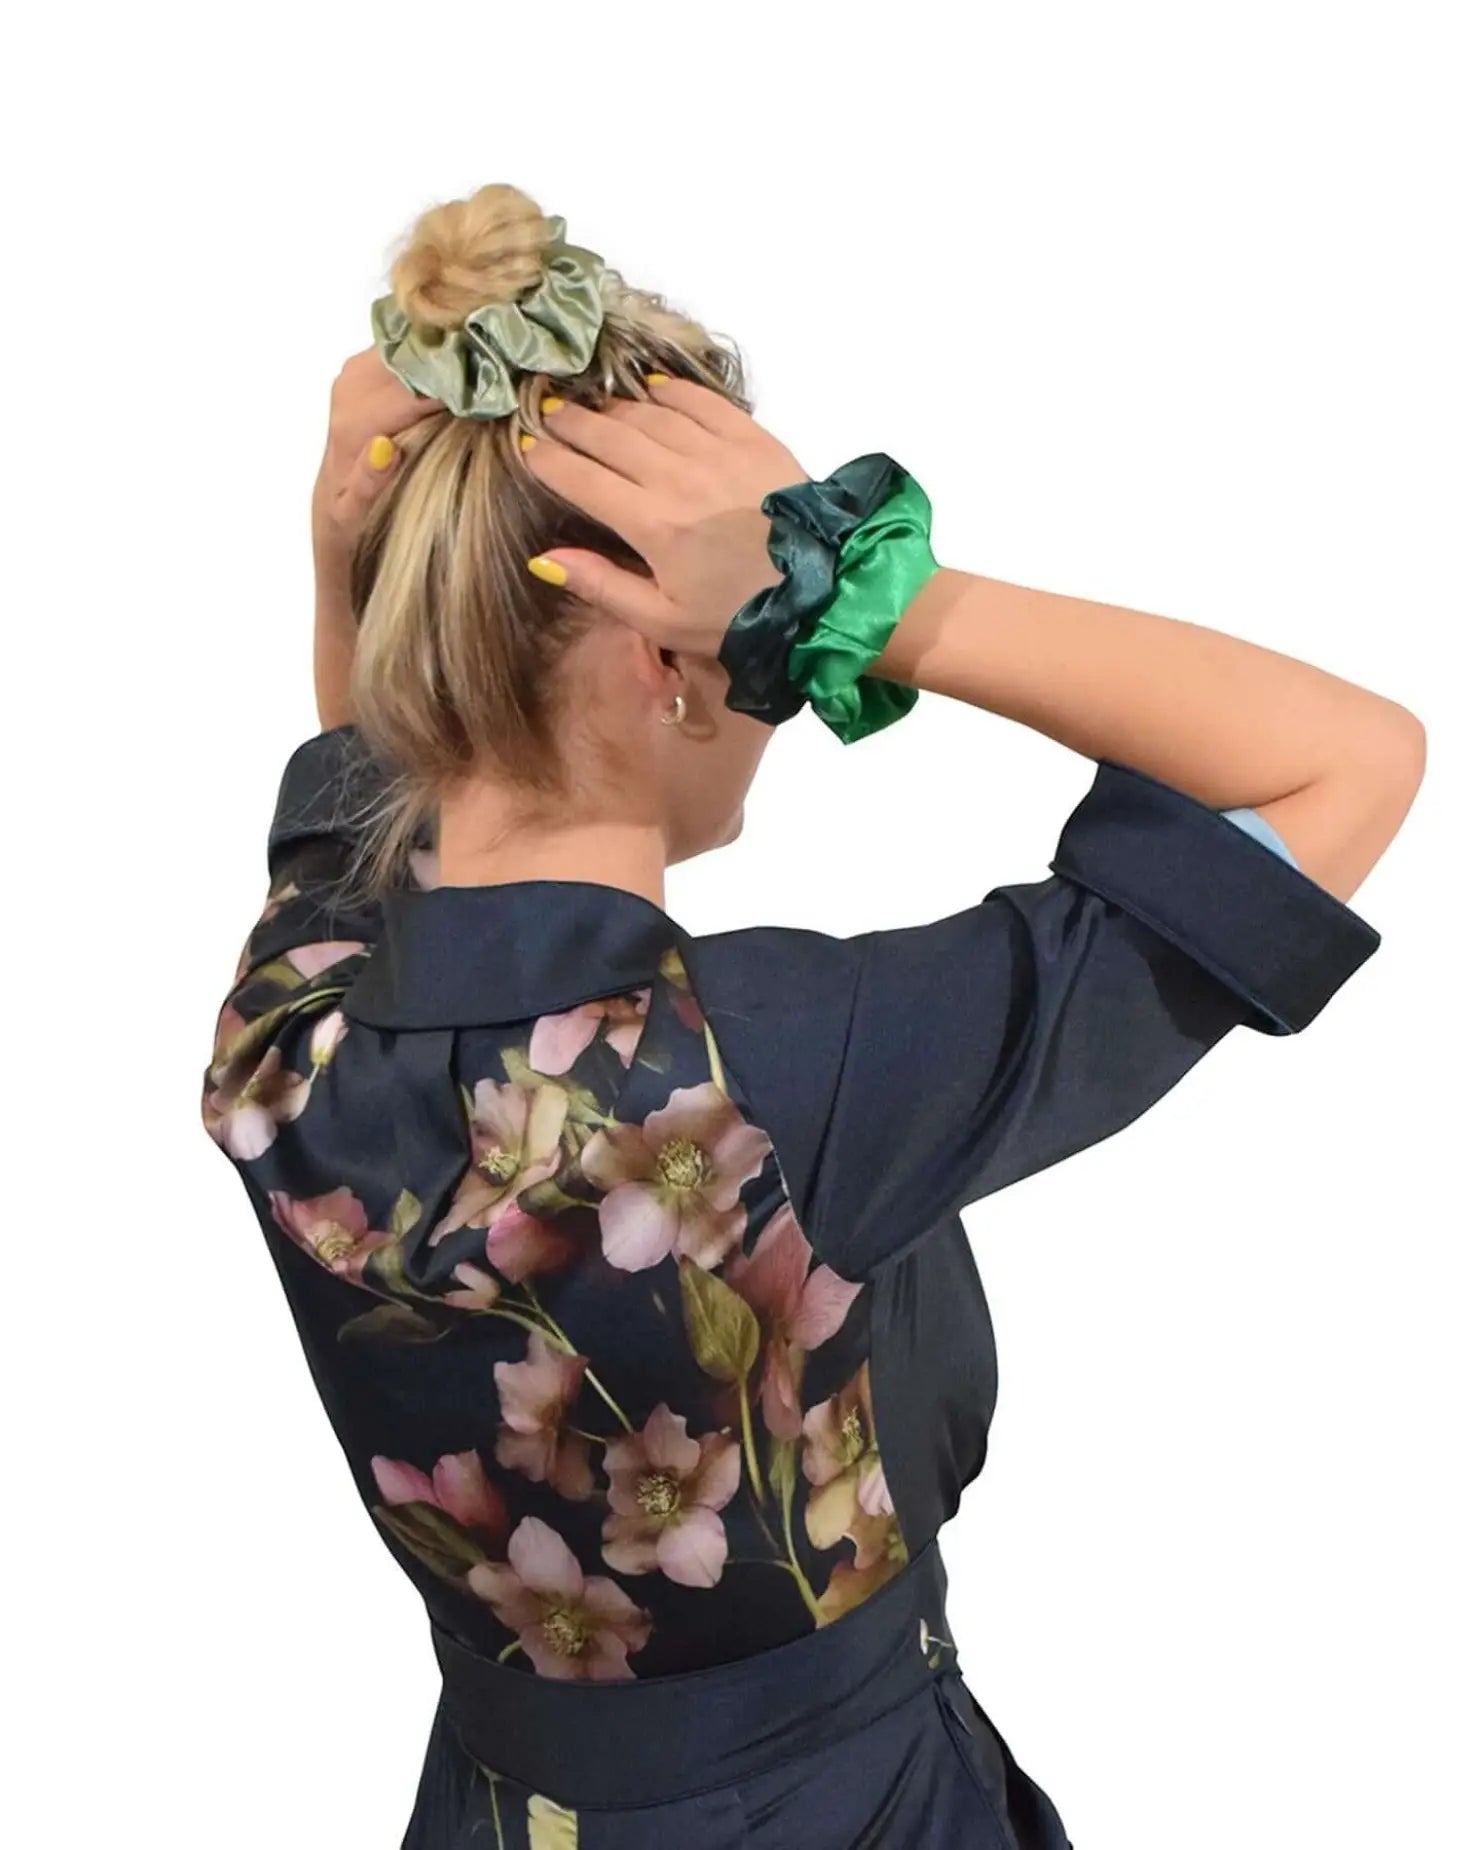 Shimmering Soft Satin Hair Scrunchies: Woman in Green Headband Flaunting Floral Print Top